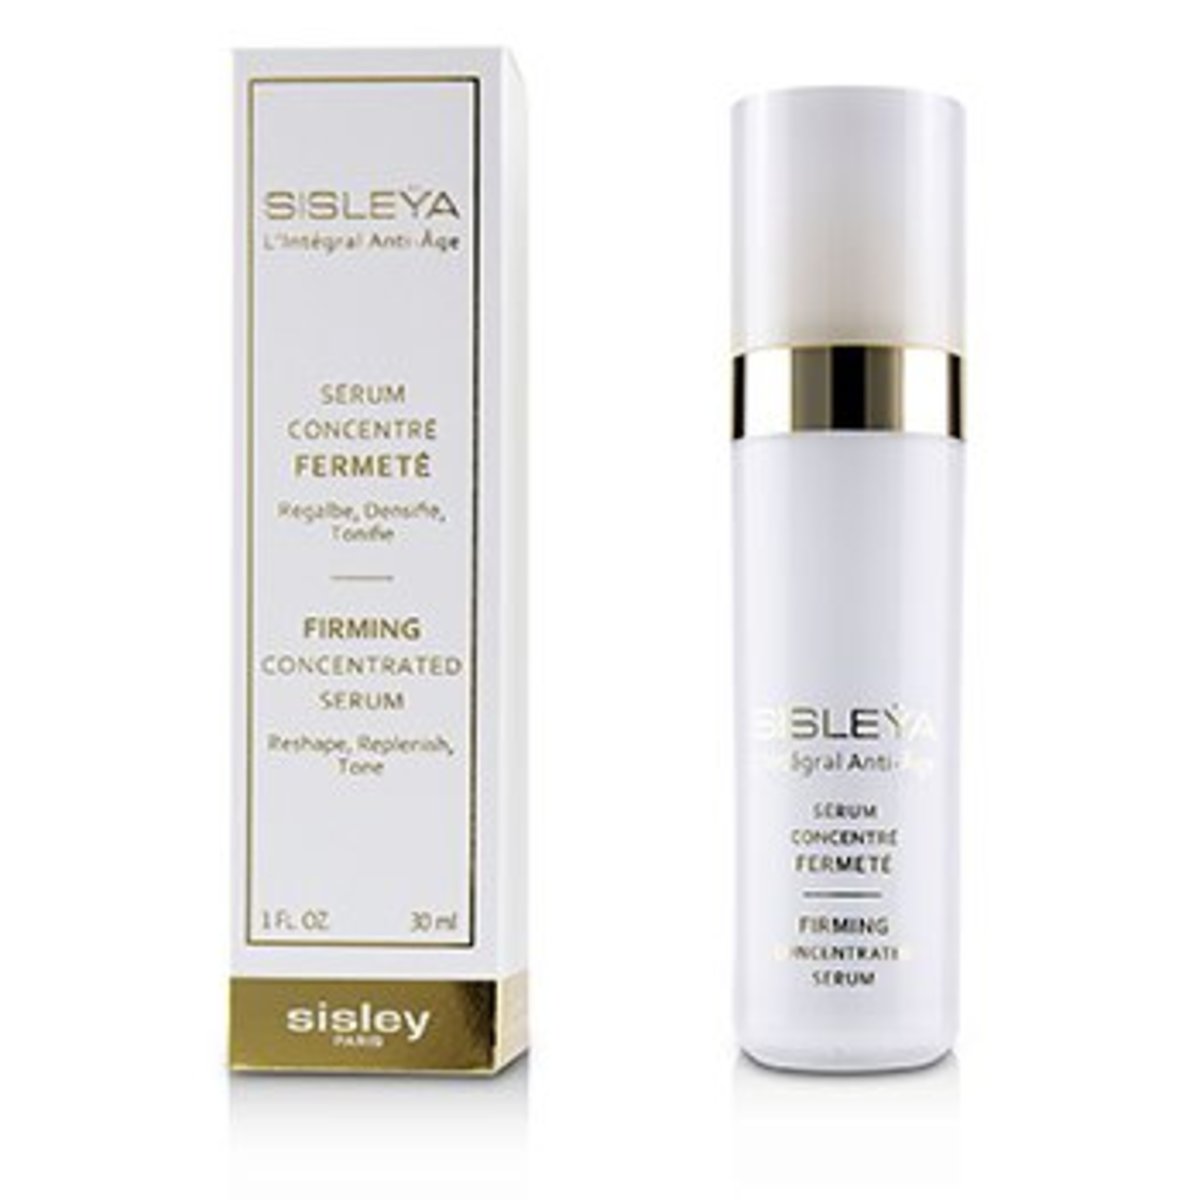 Sisleya L'Integral Anti-Age Firming Concentrated Serum 30ml/1oz - [Parallel Import Product]